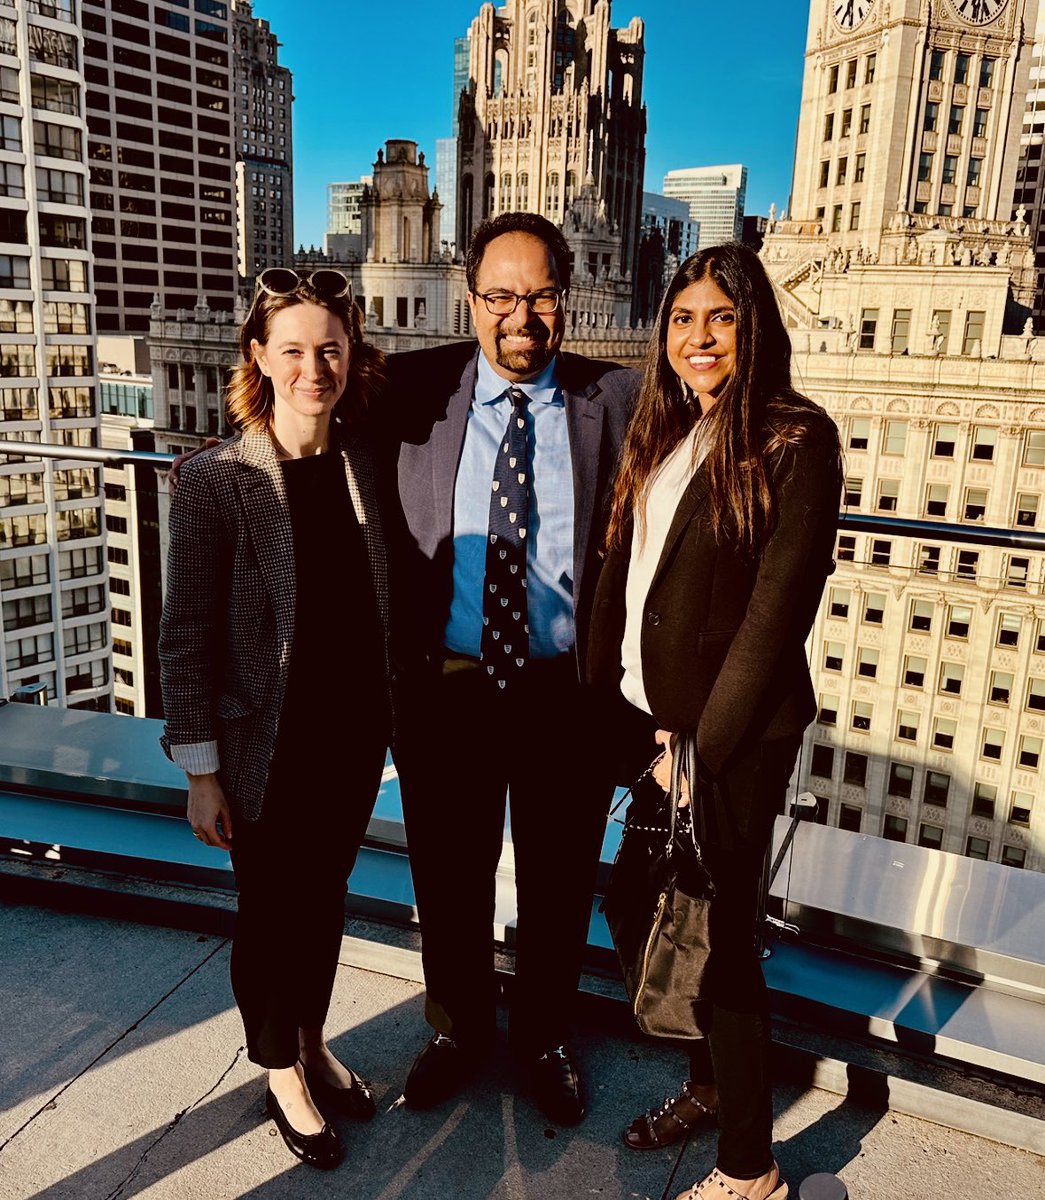 👉👉👉Shout out to our outstanding @MDAndersonNews hematology/oncology fellow MD’s Dr Hannah Goulart .@HannahGoulart & Dr .@HimaglobinA for an amazing job speaking in the Fellows’ Roundtable at #HOPLive24 meeting organized by @chadinabhan earlier this month! 👏 | #MPNSM #leusm